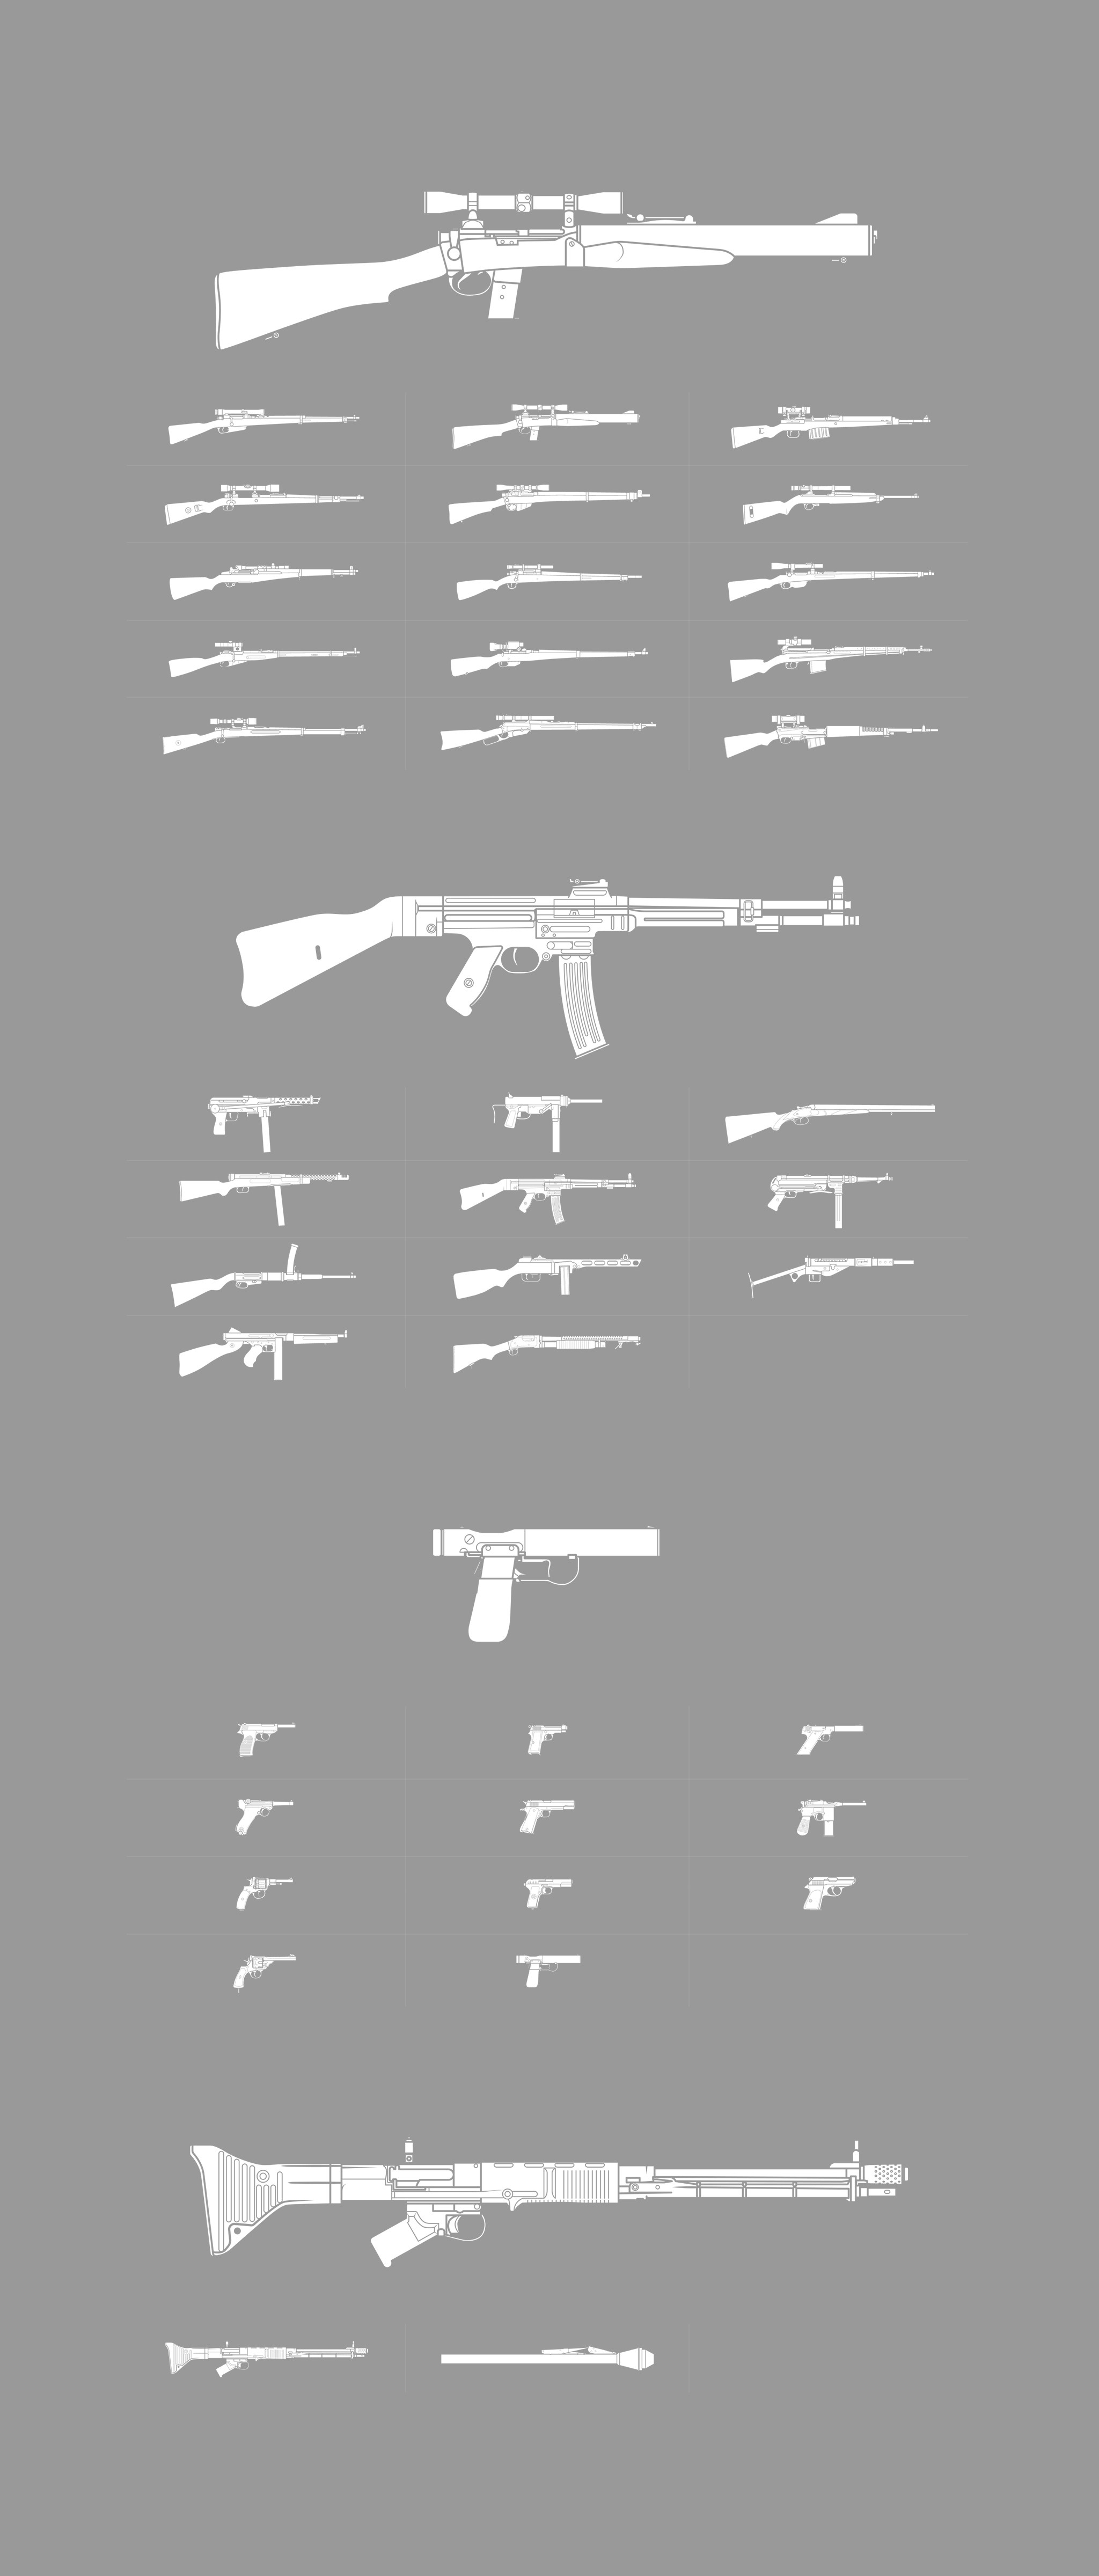 The suite of the base Weapon icons